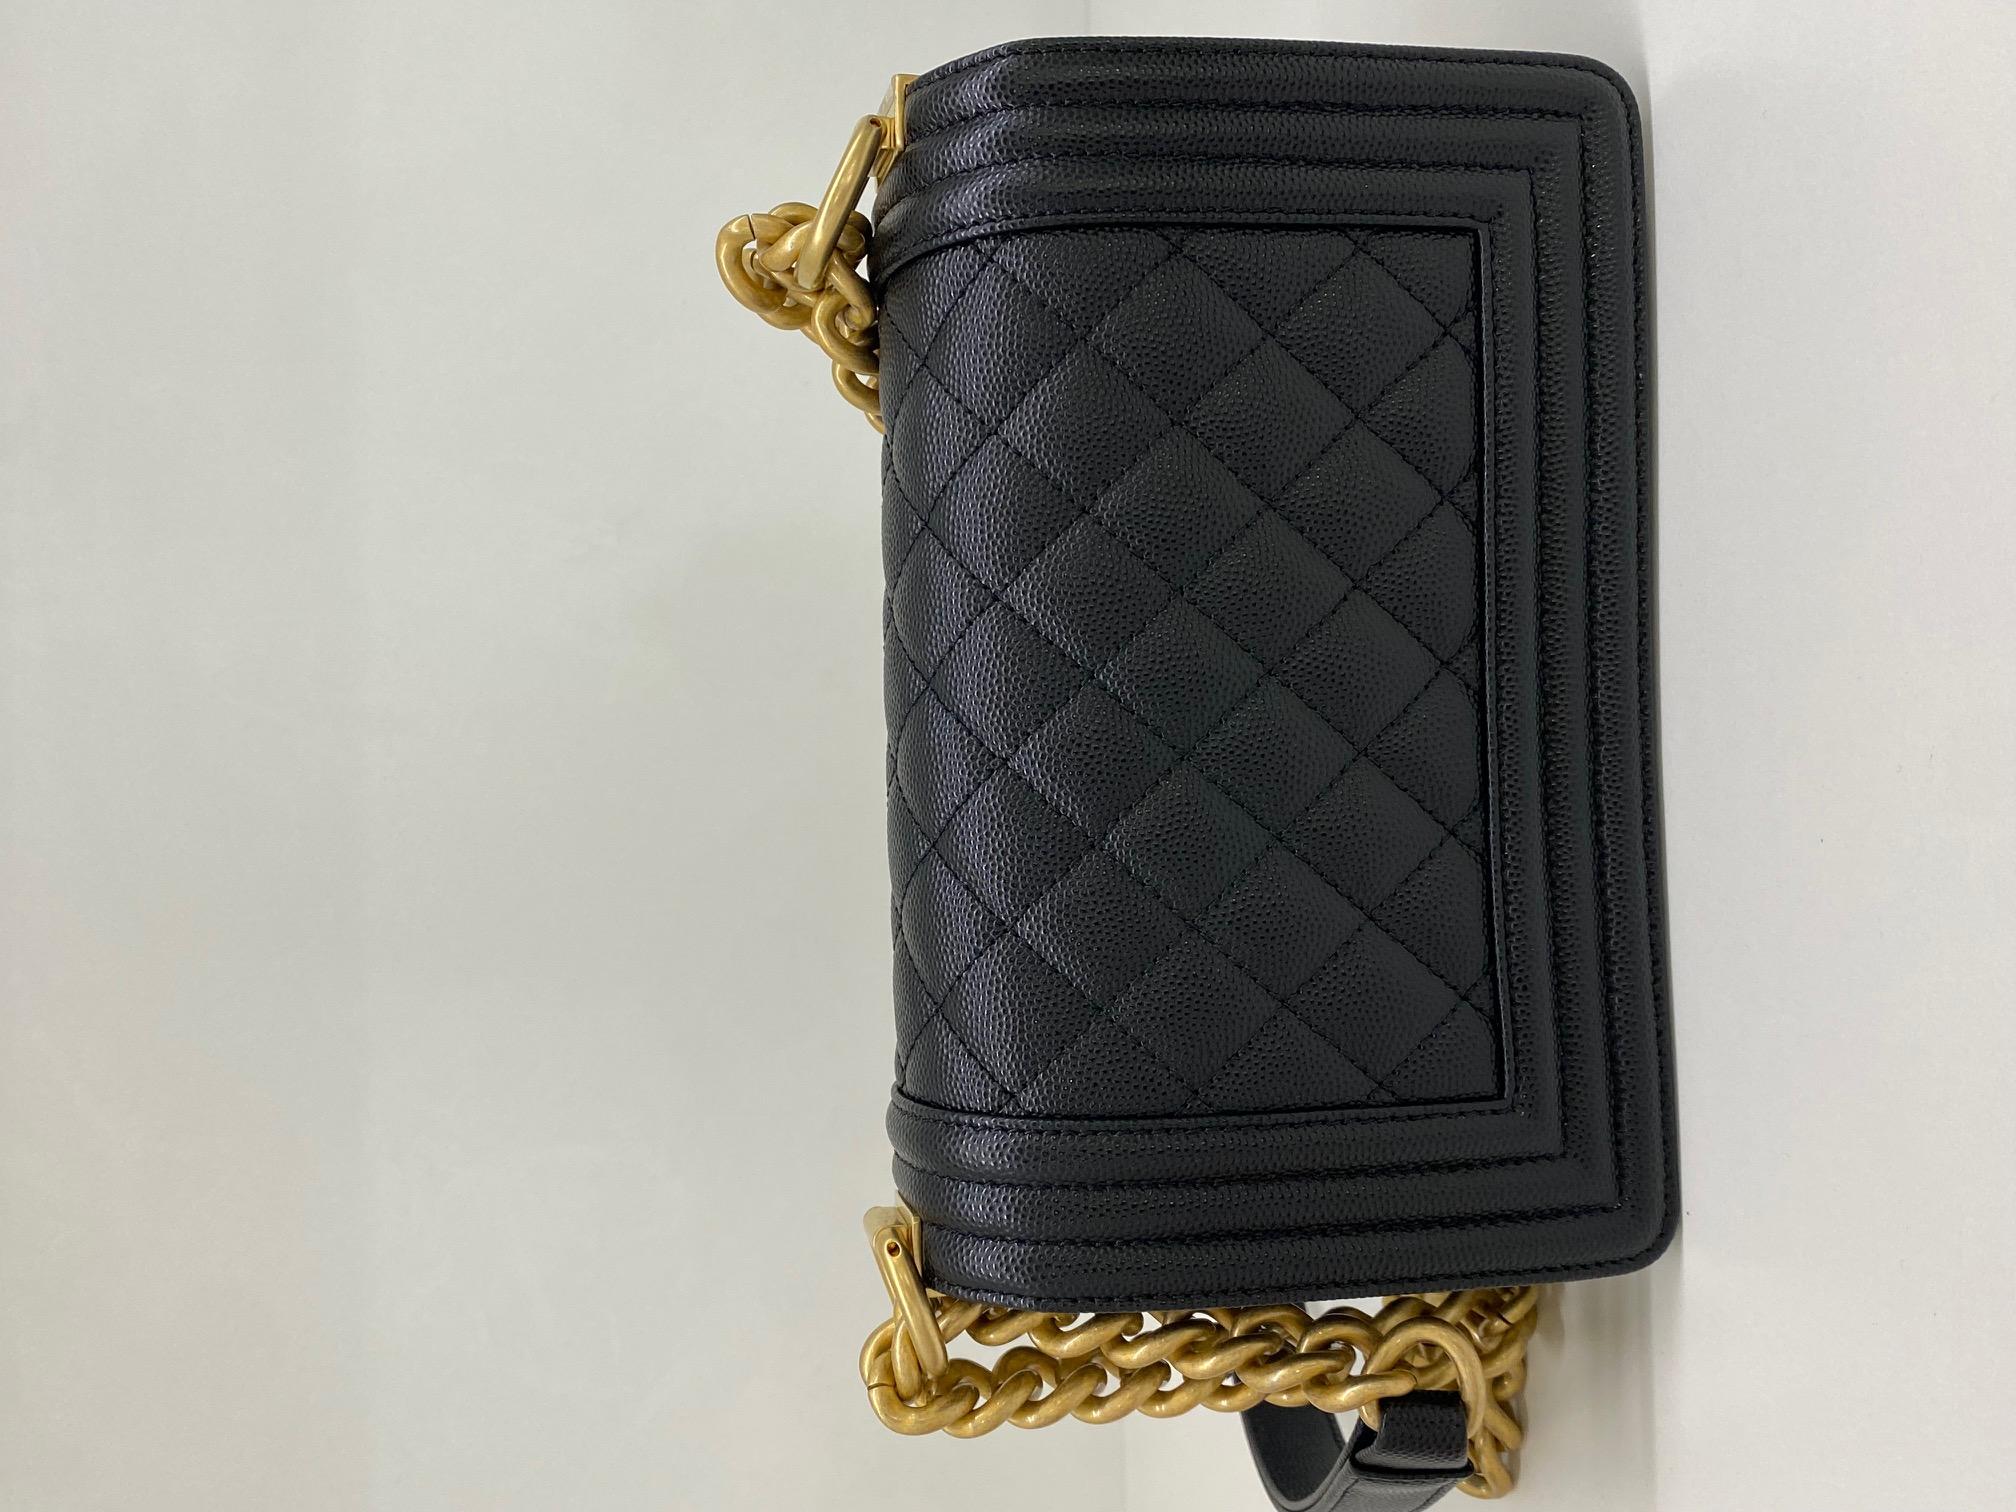 Chanel Boy Bag Small Black GHW In Excellent Condition For Sale In Double Bay, AU